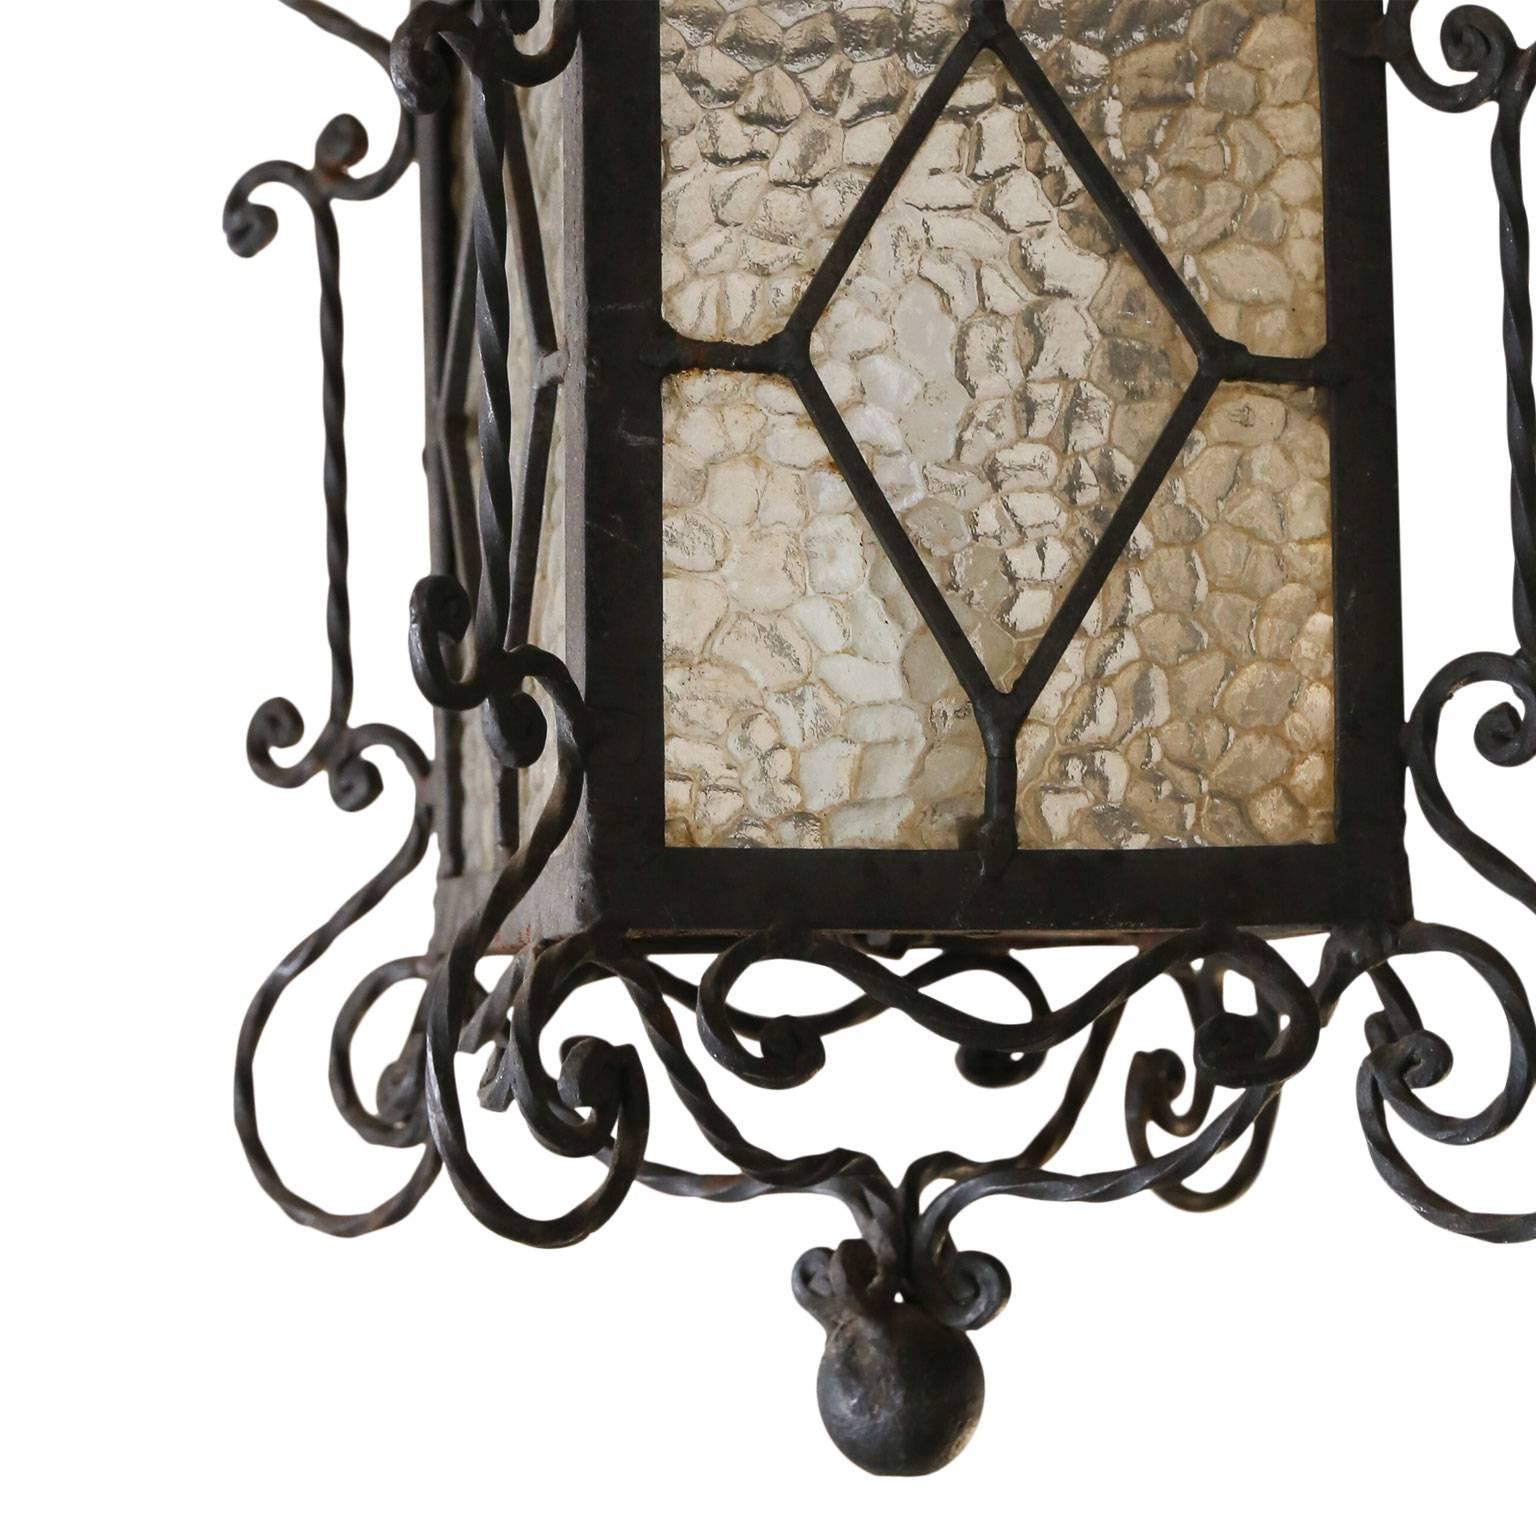 Single-light vintage black-painted wrought iron lantern from Spain.